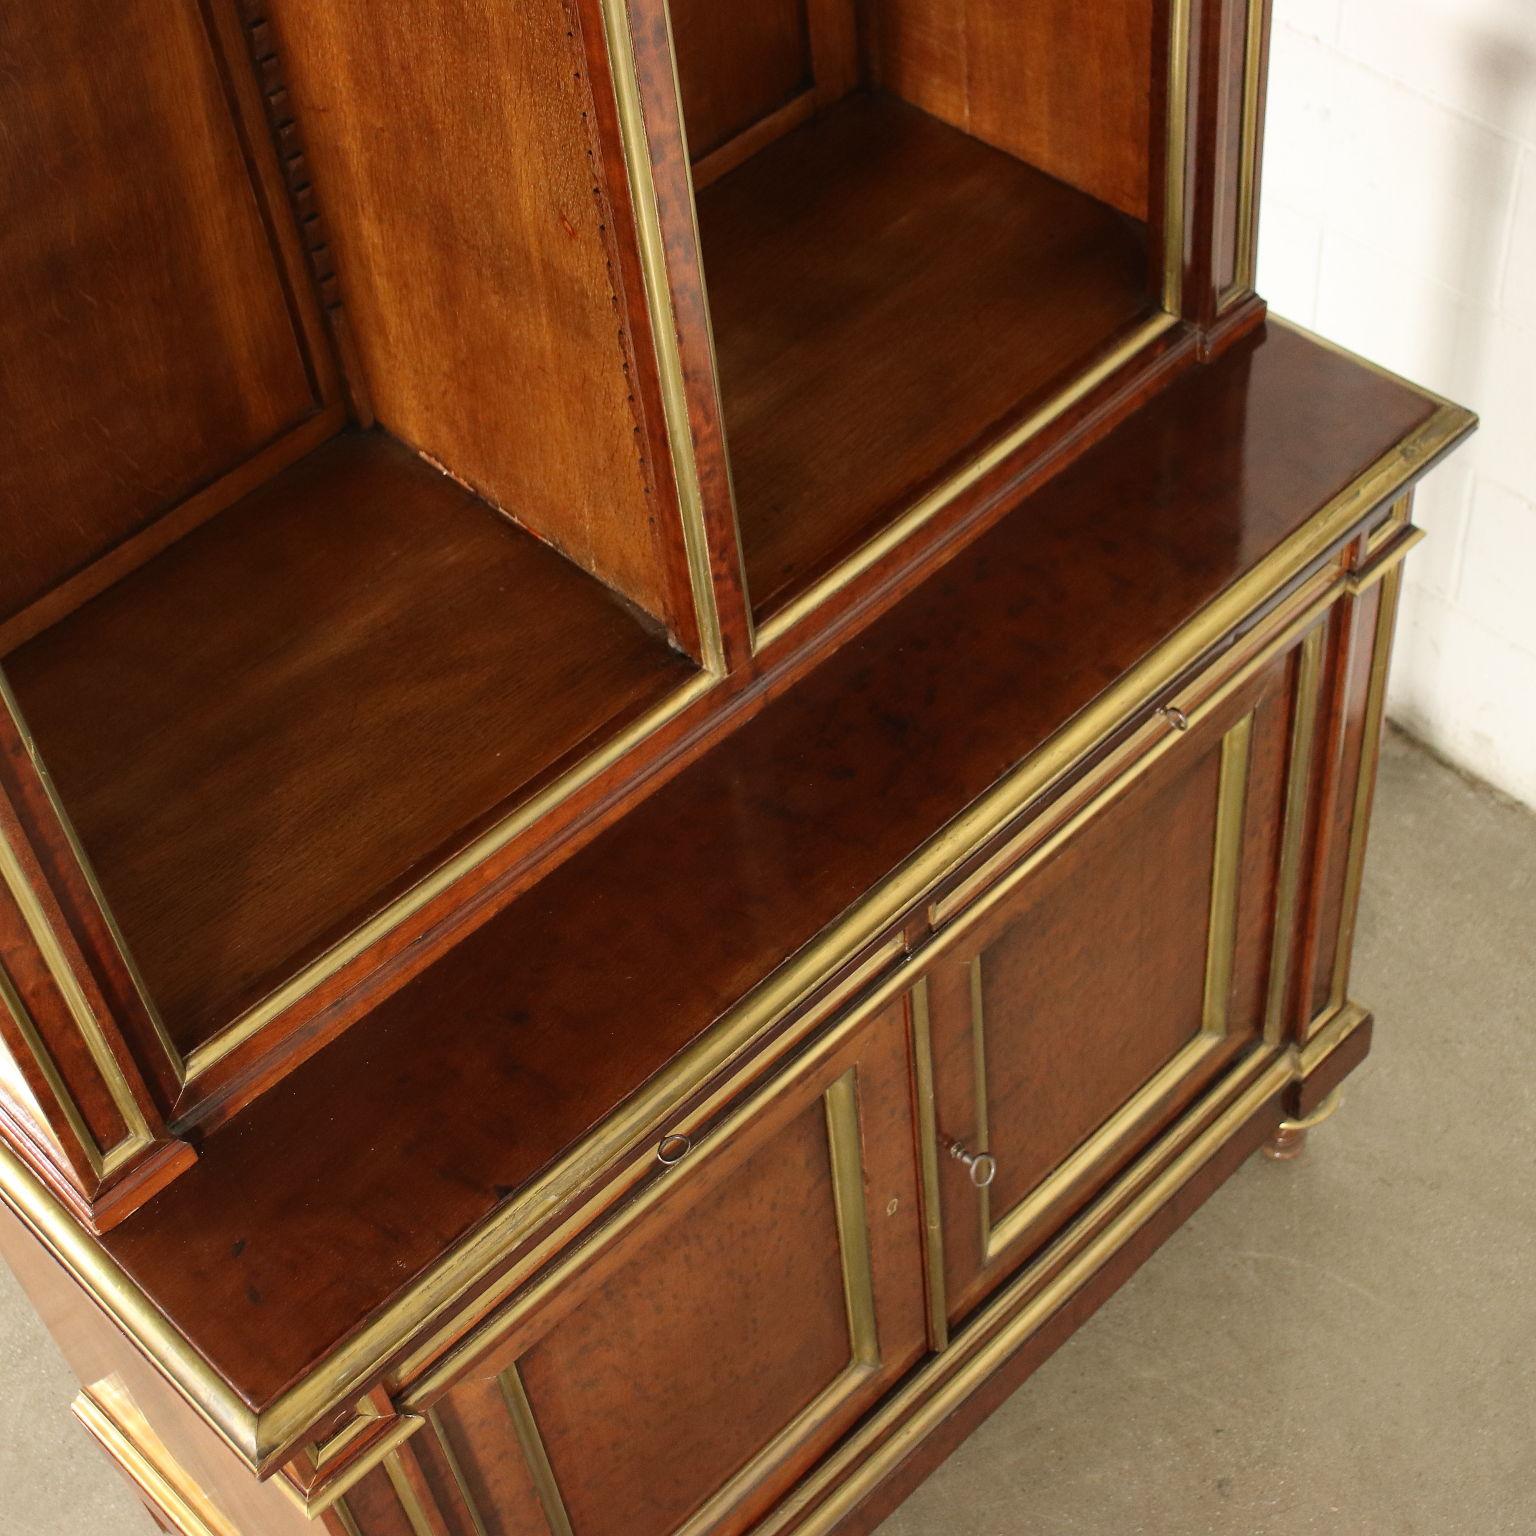 Bookcase Empire Mahogany Veneer Sessile Oak France Early 19th Century For Sale 7